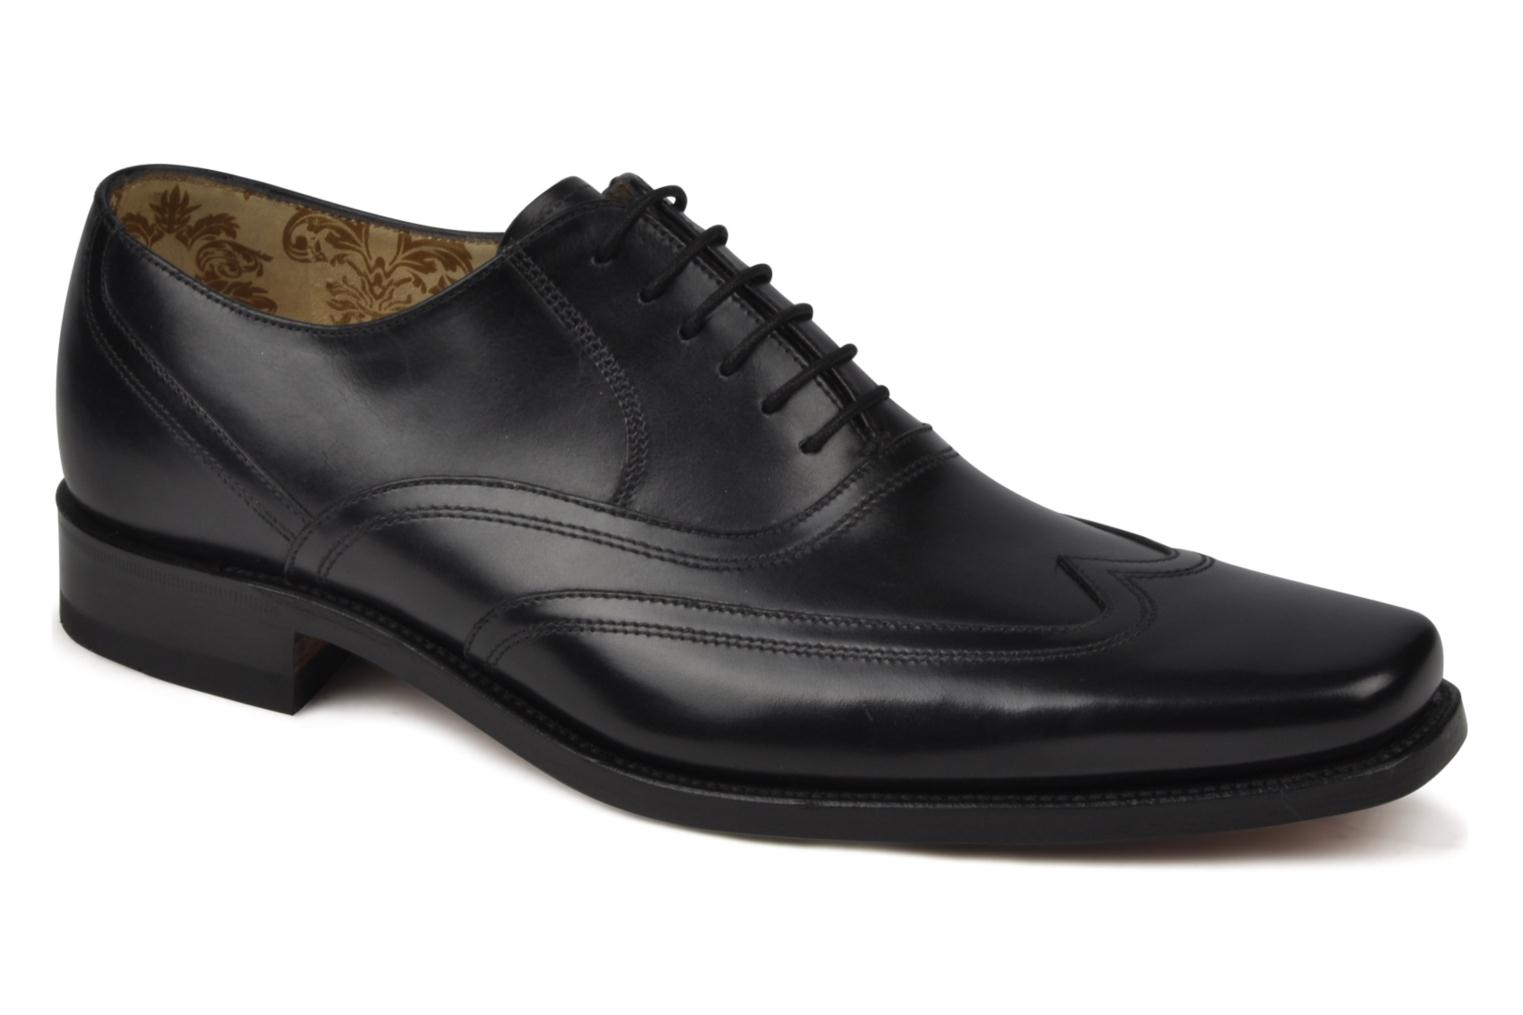 LOAKE Snipes Lace-up shoes in Black at Sarenza.co.uk (42344)